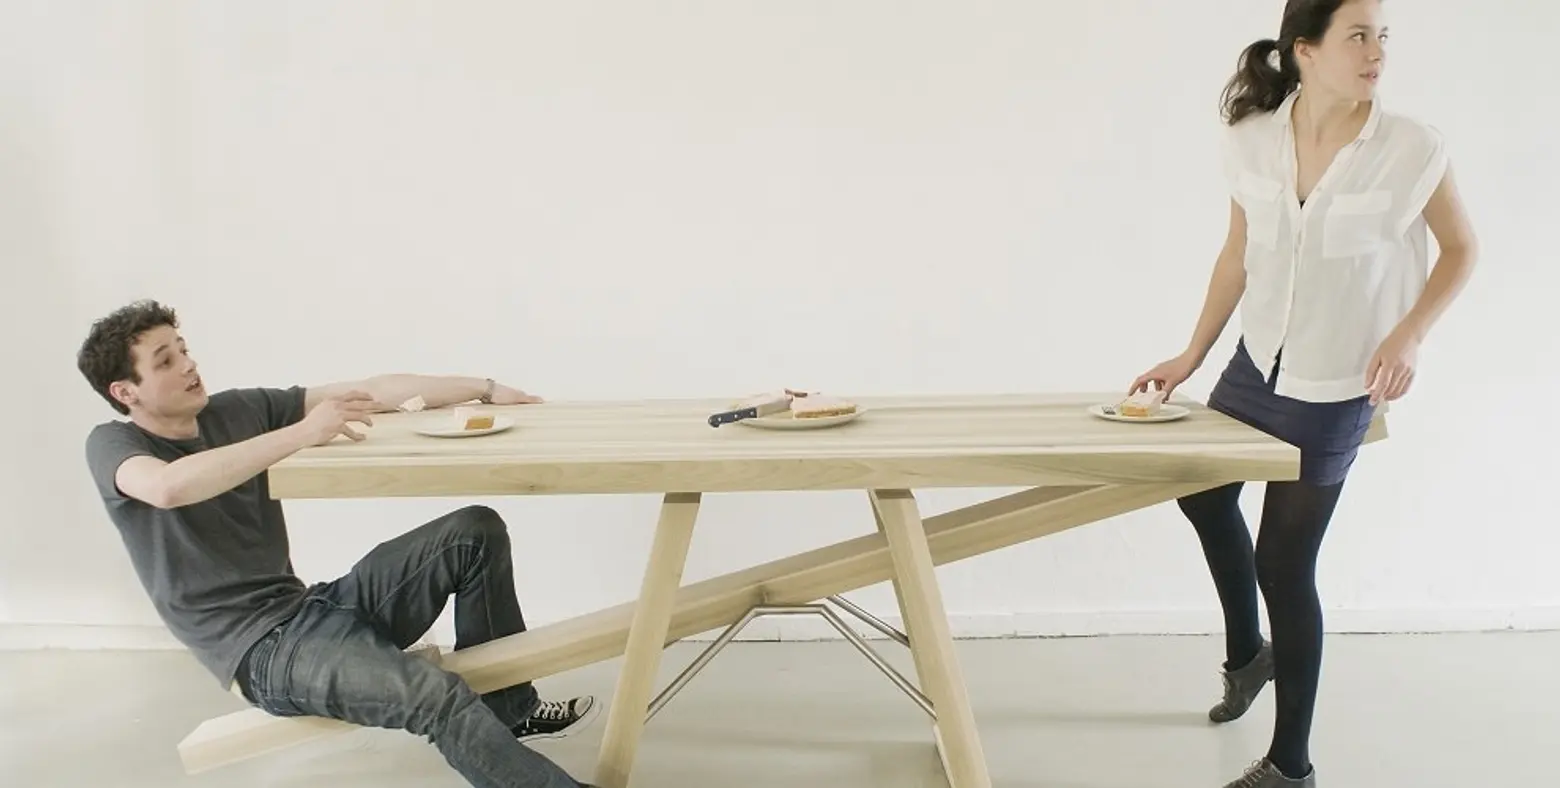 This Seesaw Table Was Designed to Keep You Alert During Meal Times